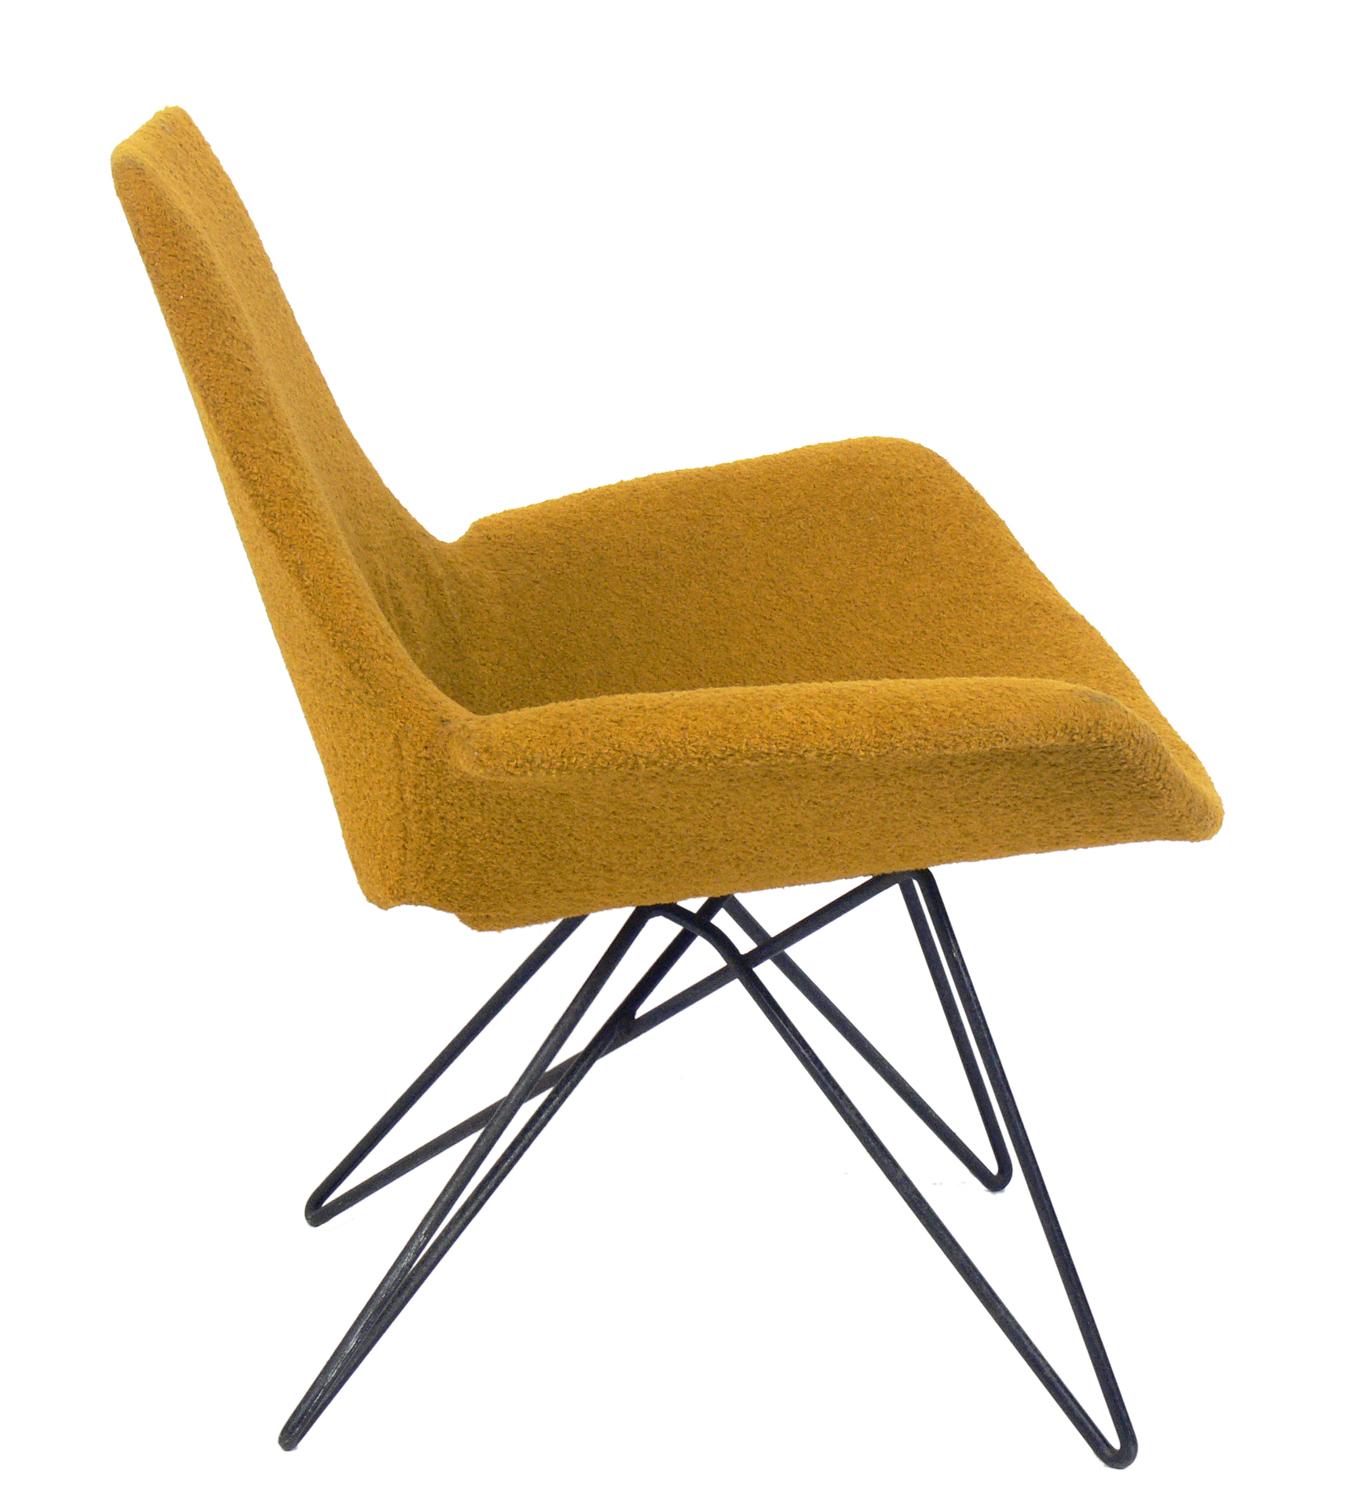 Brazilian Curvaceous Midcentury Chair Attributed to Martin Eisler